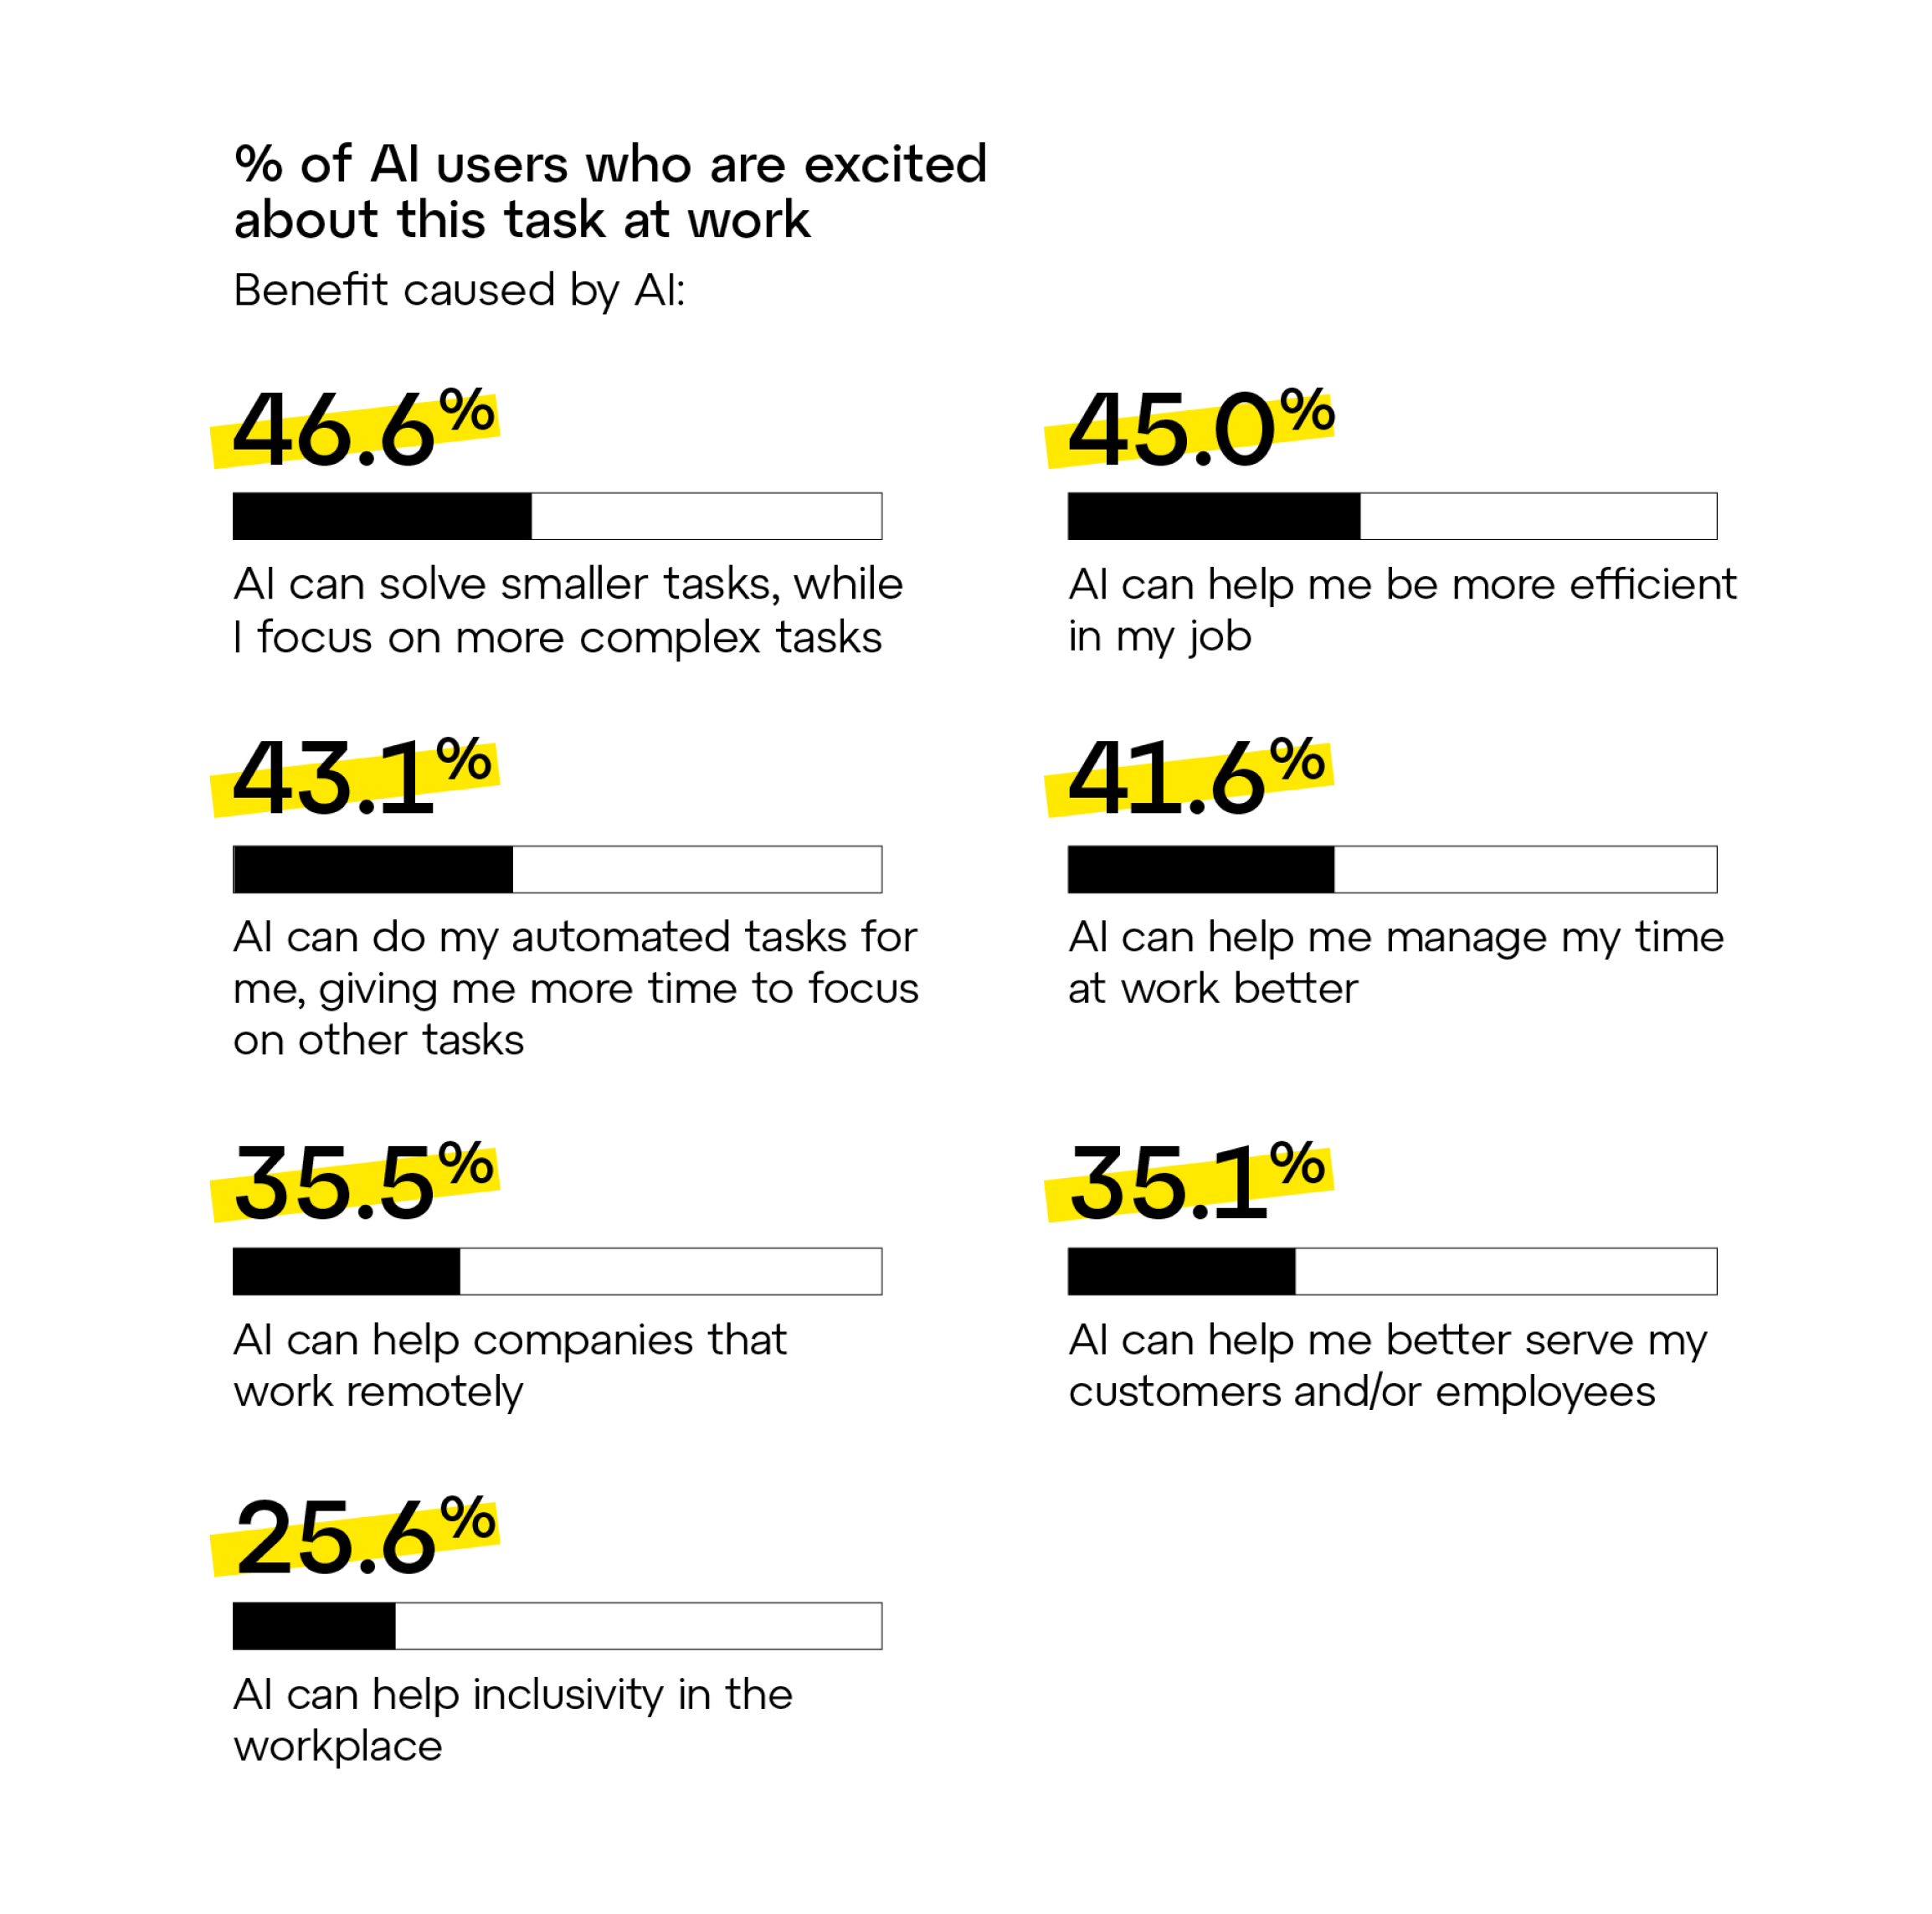 Table showing the percentage of AI users who are excited about this task at work.